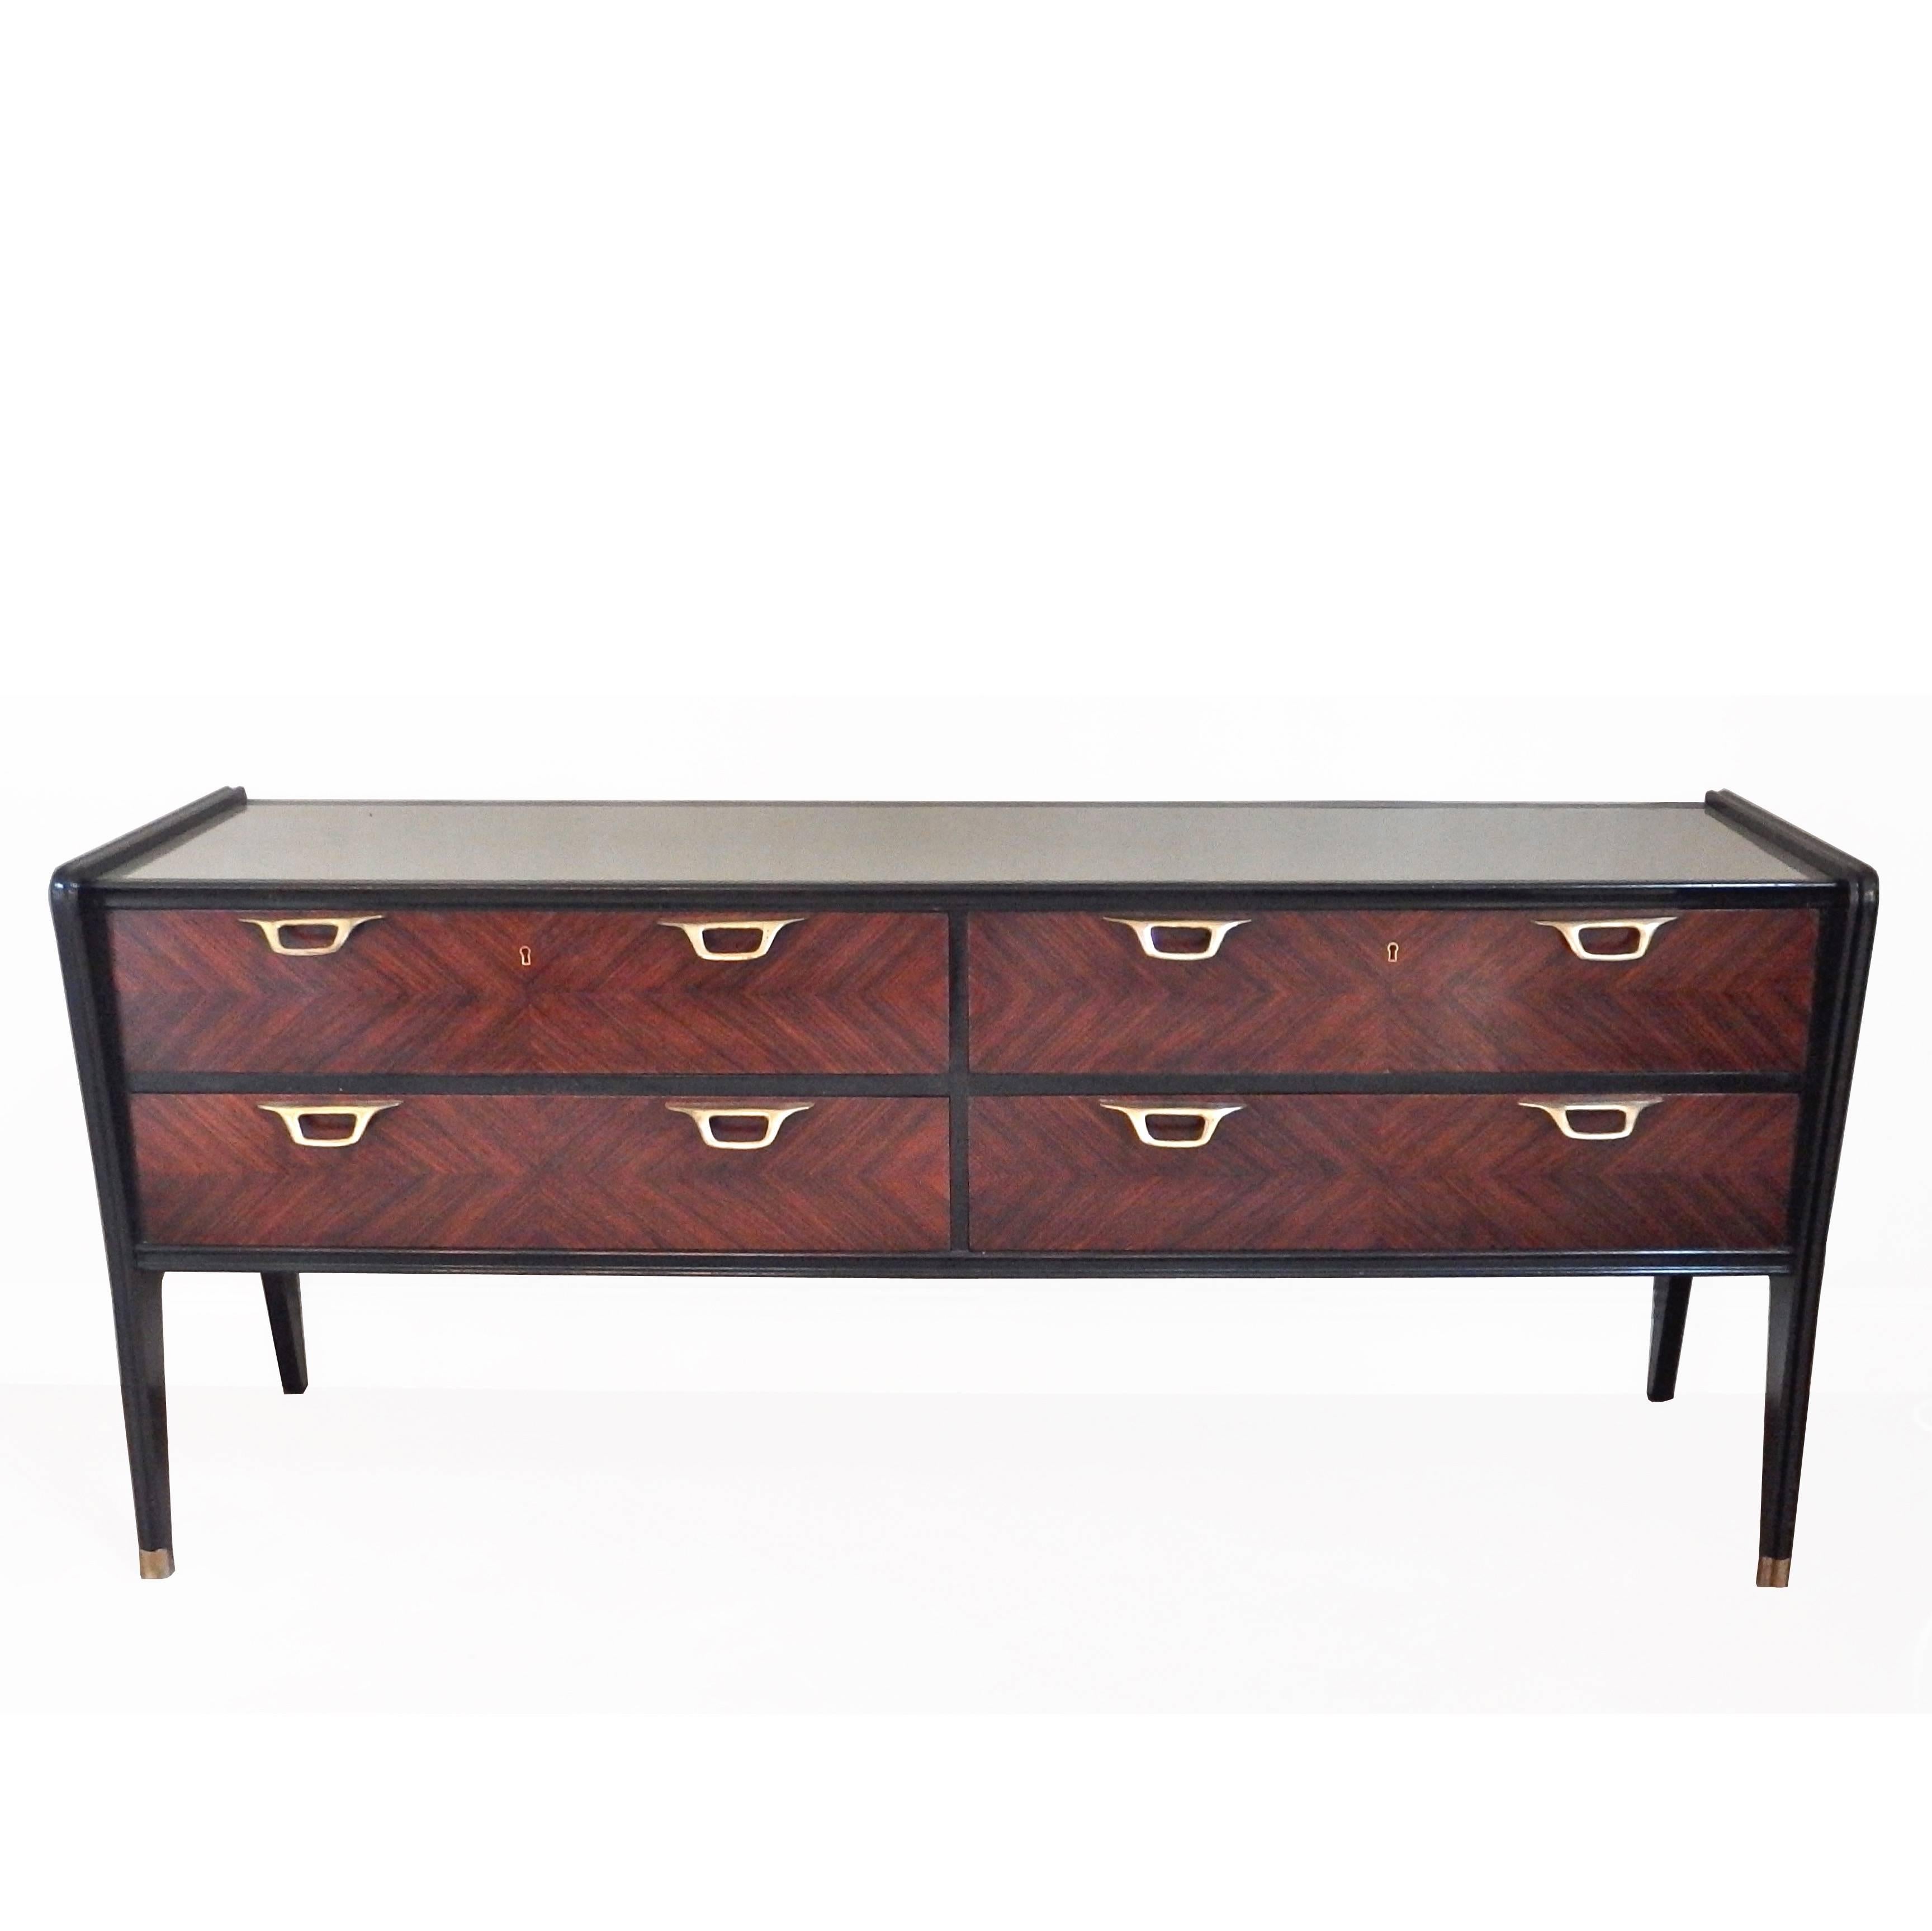 Beautiful Italian rosewood sideboard with herringbone parquetry front, silver-grey glass top and brass handles and sabots, attributed to Paolo Buffa. 

Period: 1950s

Dimensions: H 80, W 185, D 54cm.